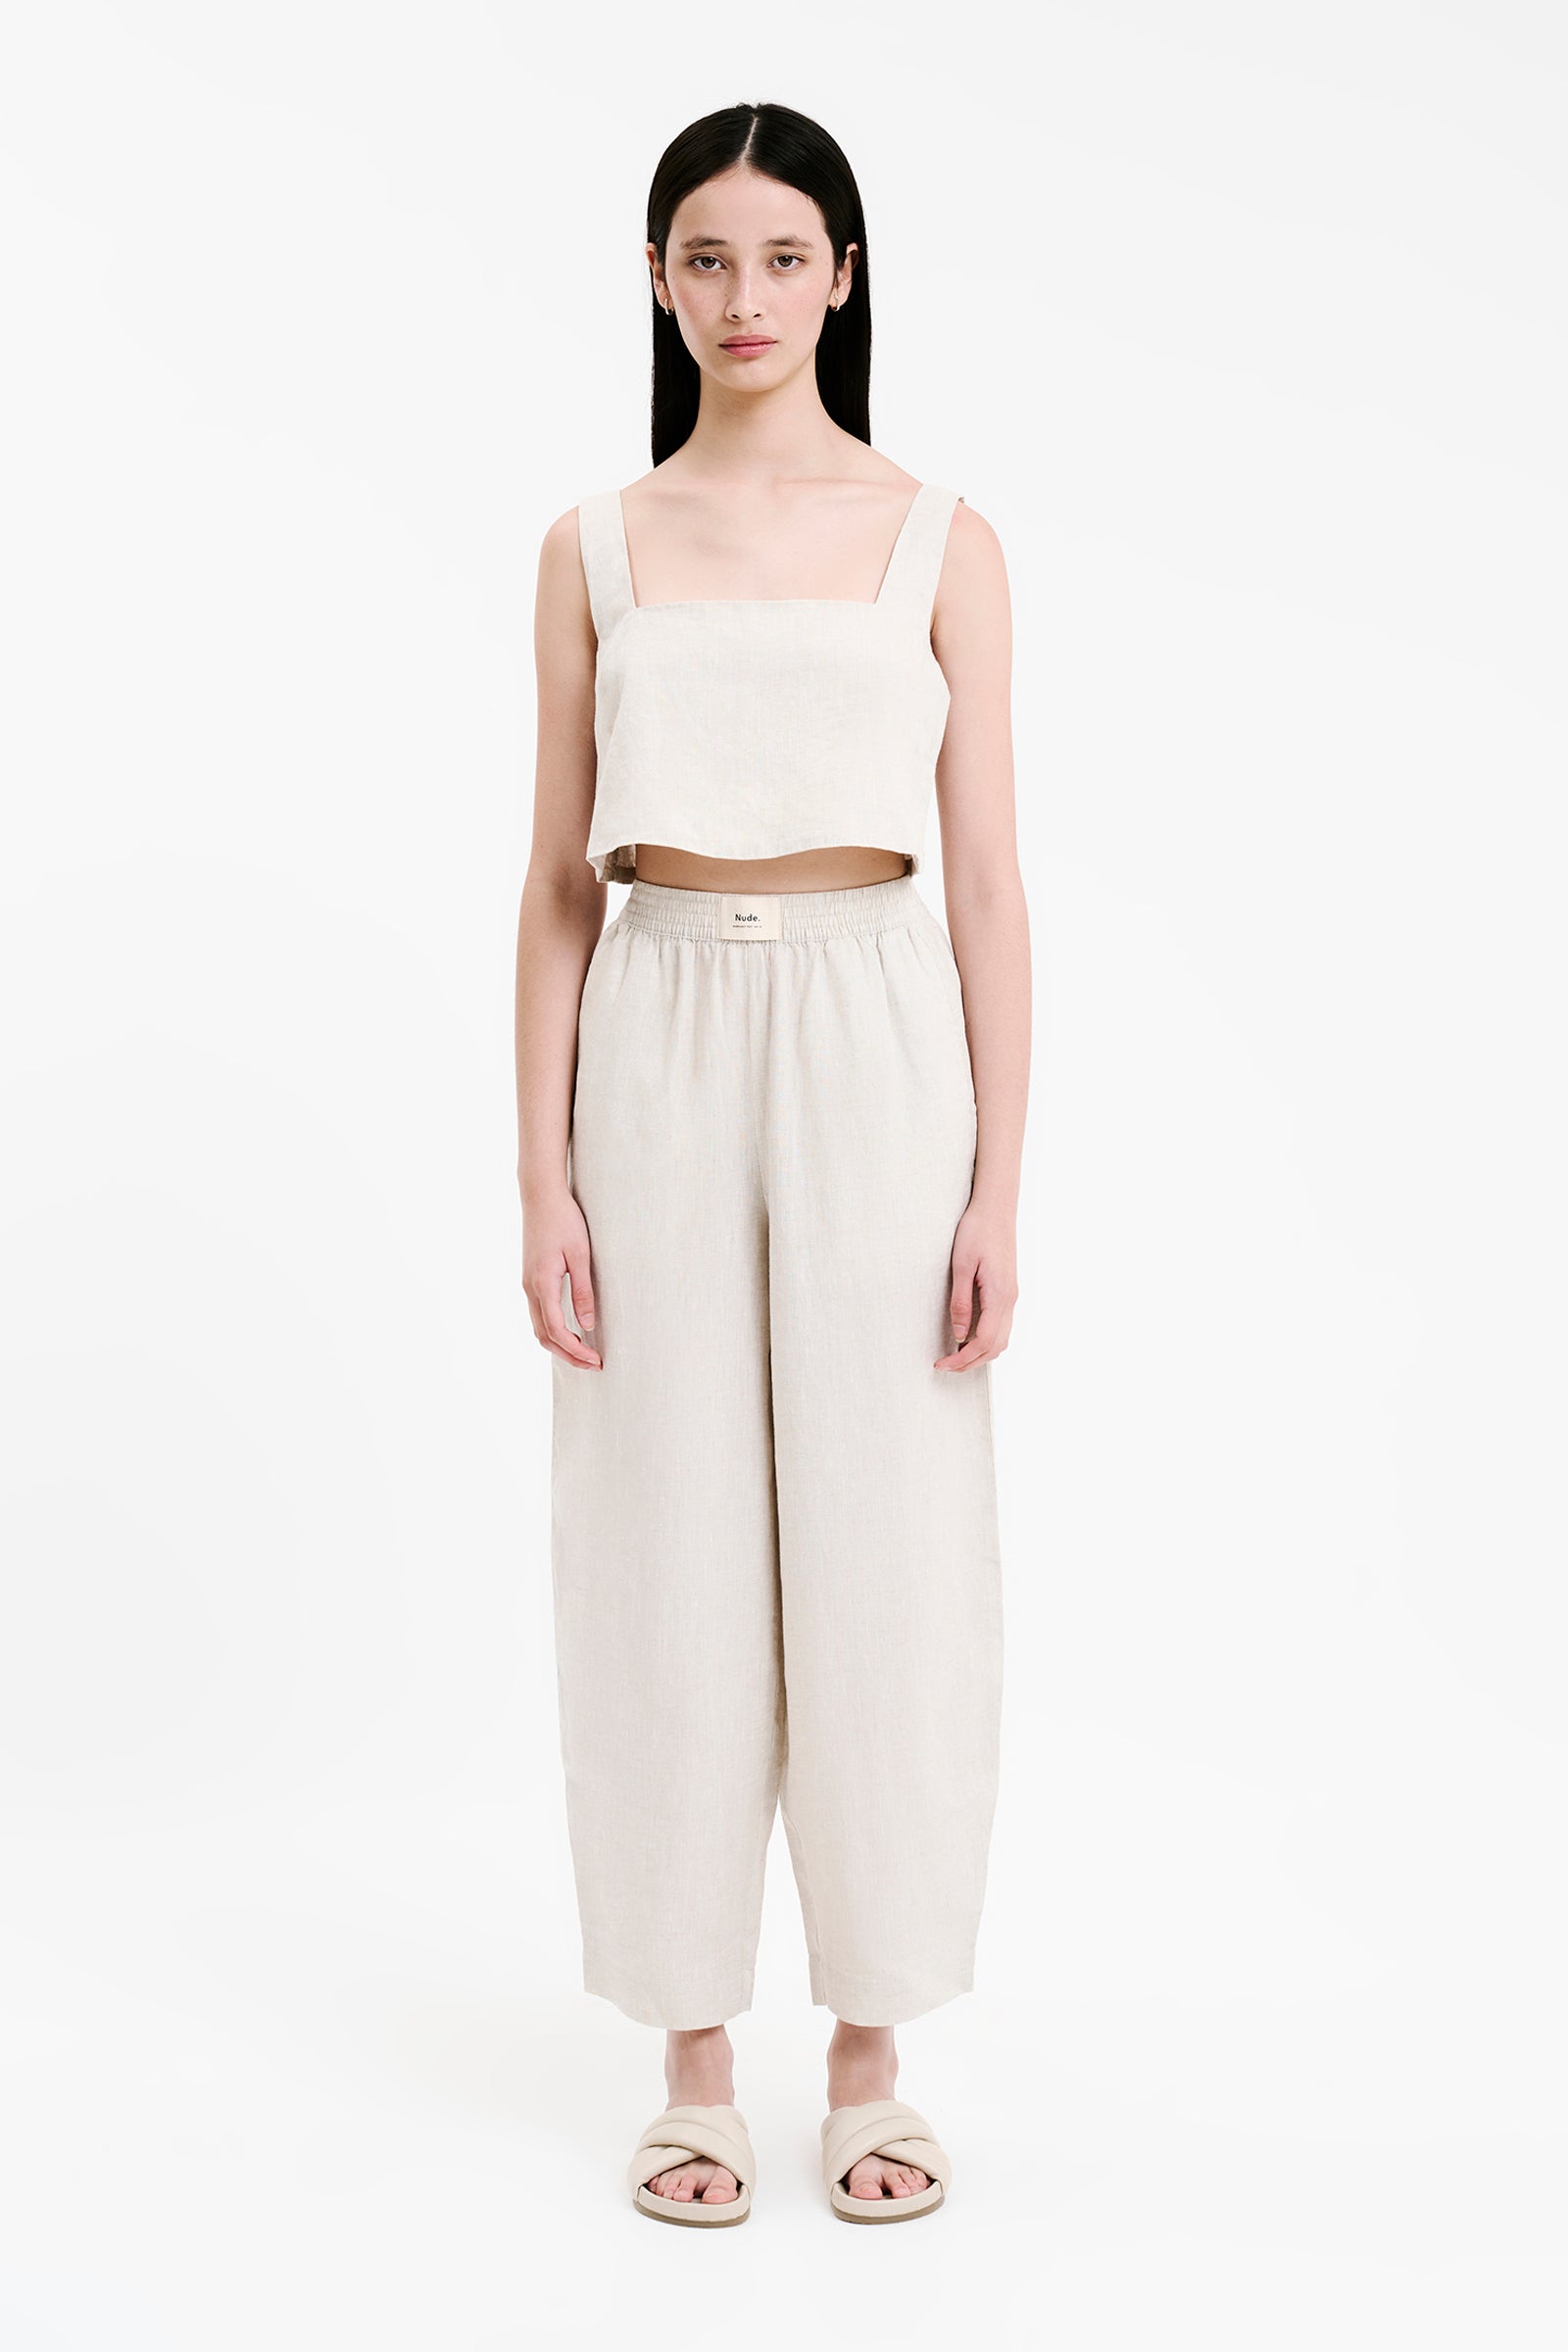 Nude Lucy Lounge Heritage Linen Pant In Natural 